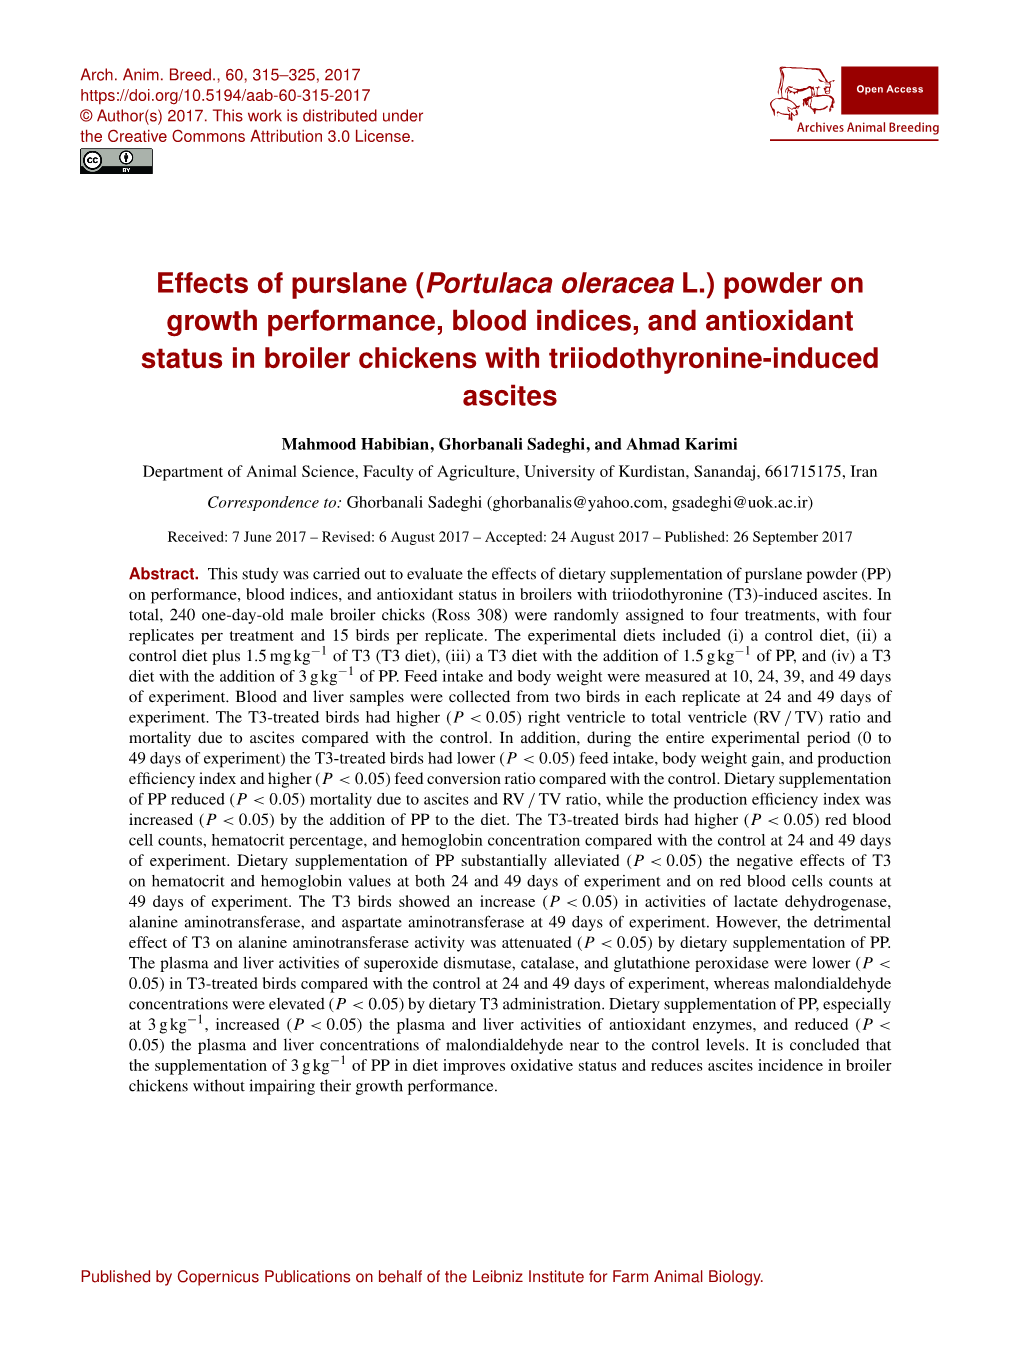 Effects of Purslane (Portulaca Oleracea L.) Powder on Growth Performance, Blood Indices, and Antioxidant Status in Broiler Chick